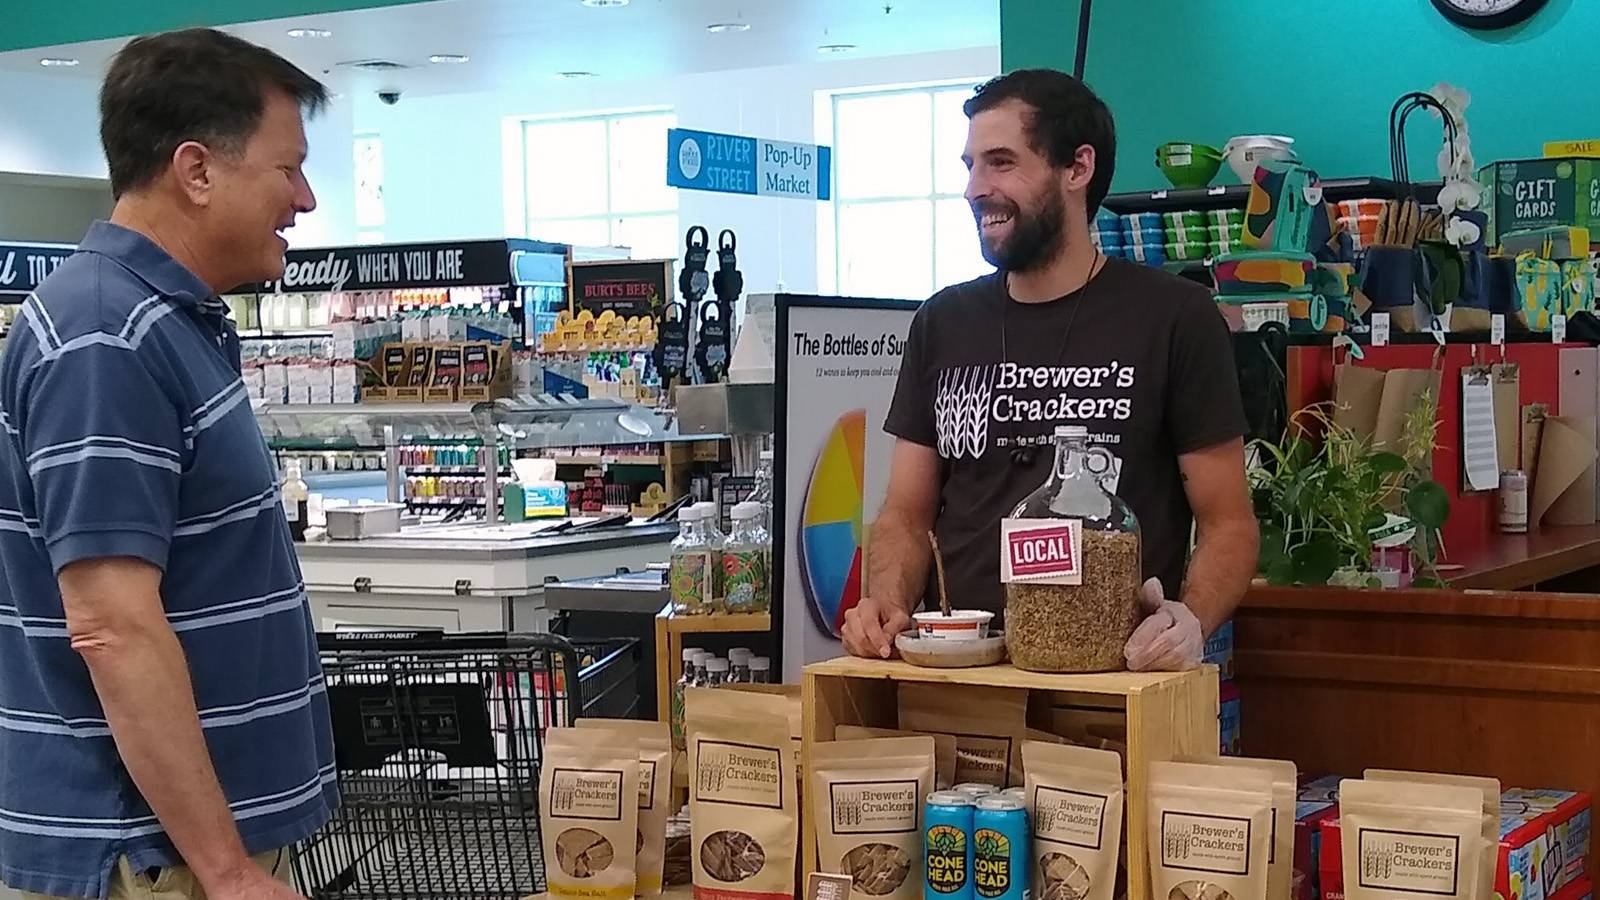 Person at a grocery store conducting a product demonstration